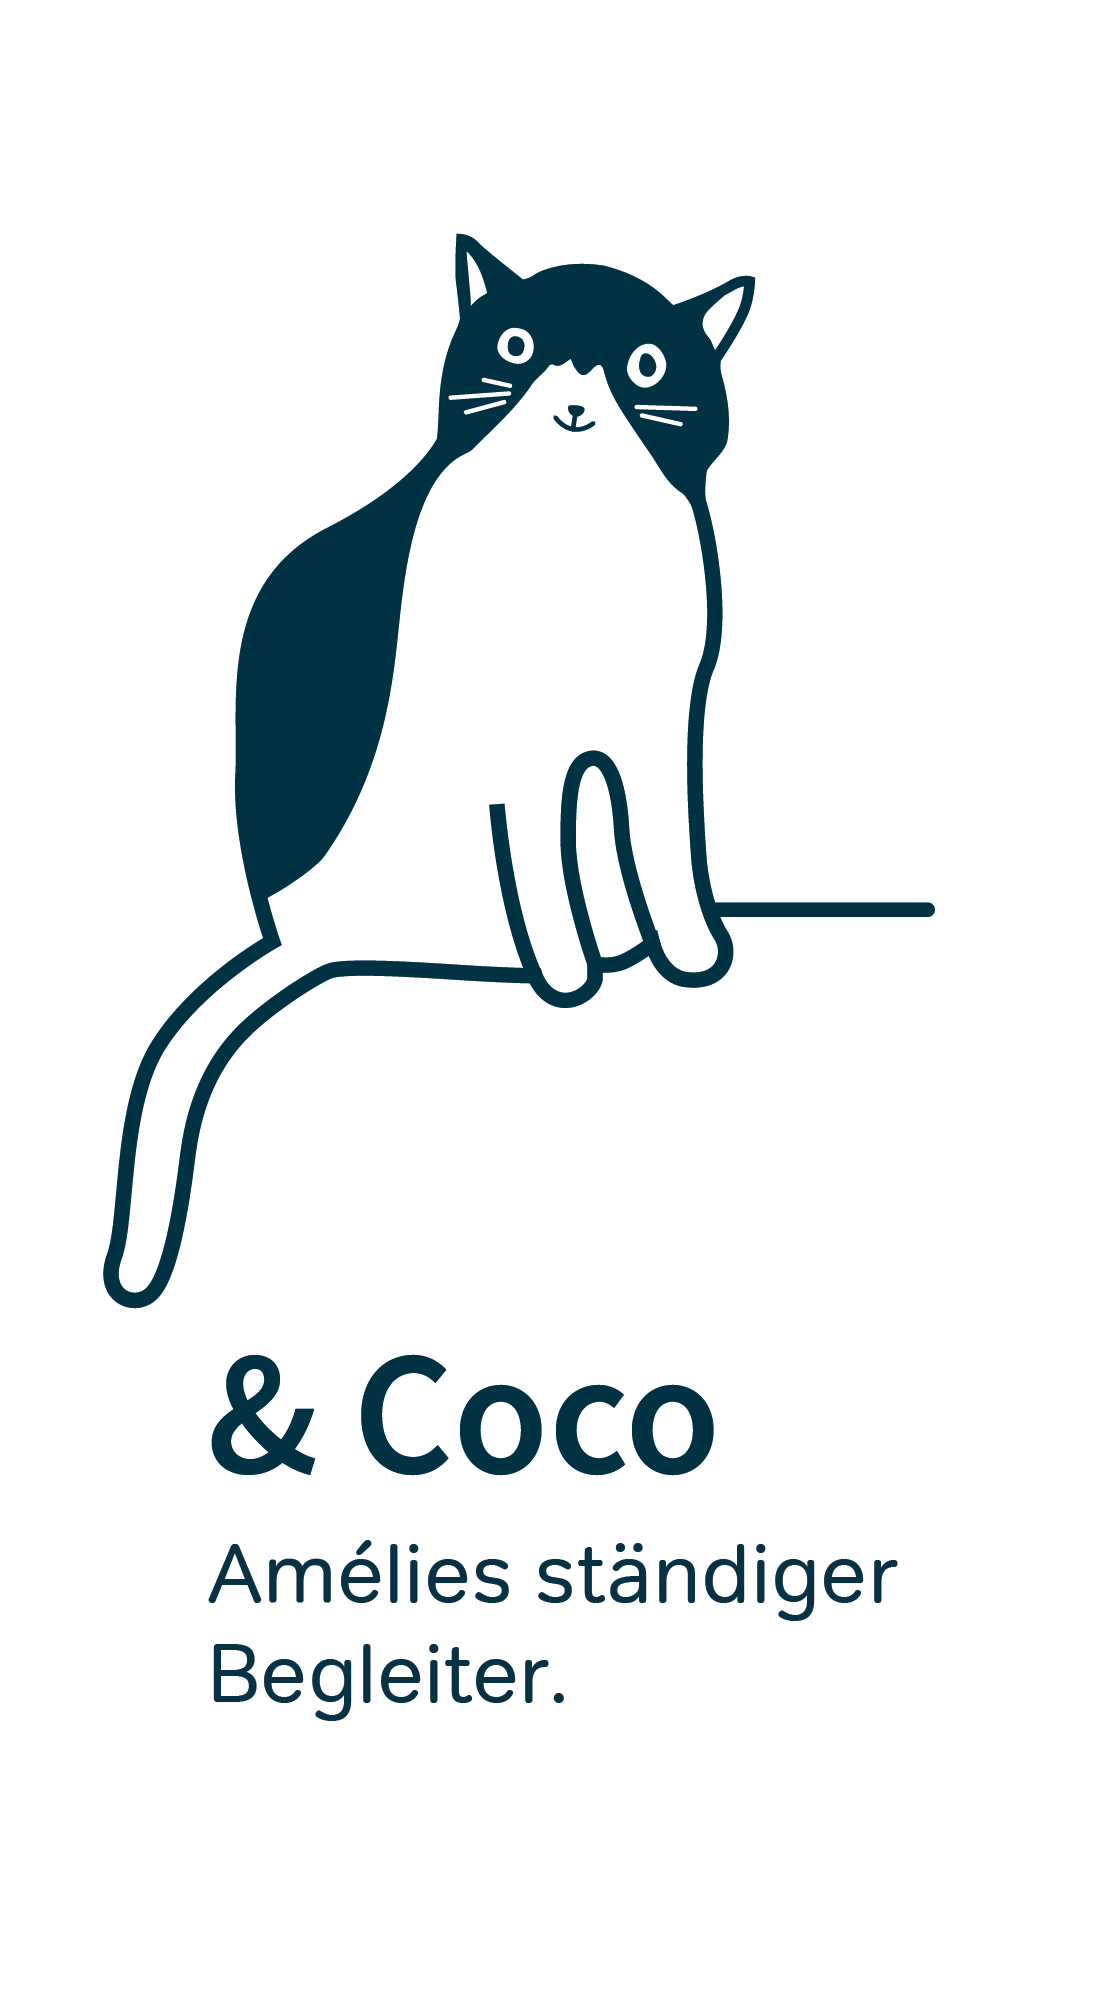 Equipe characters Coco by GPU Design